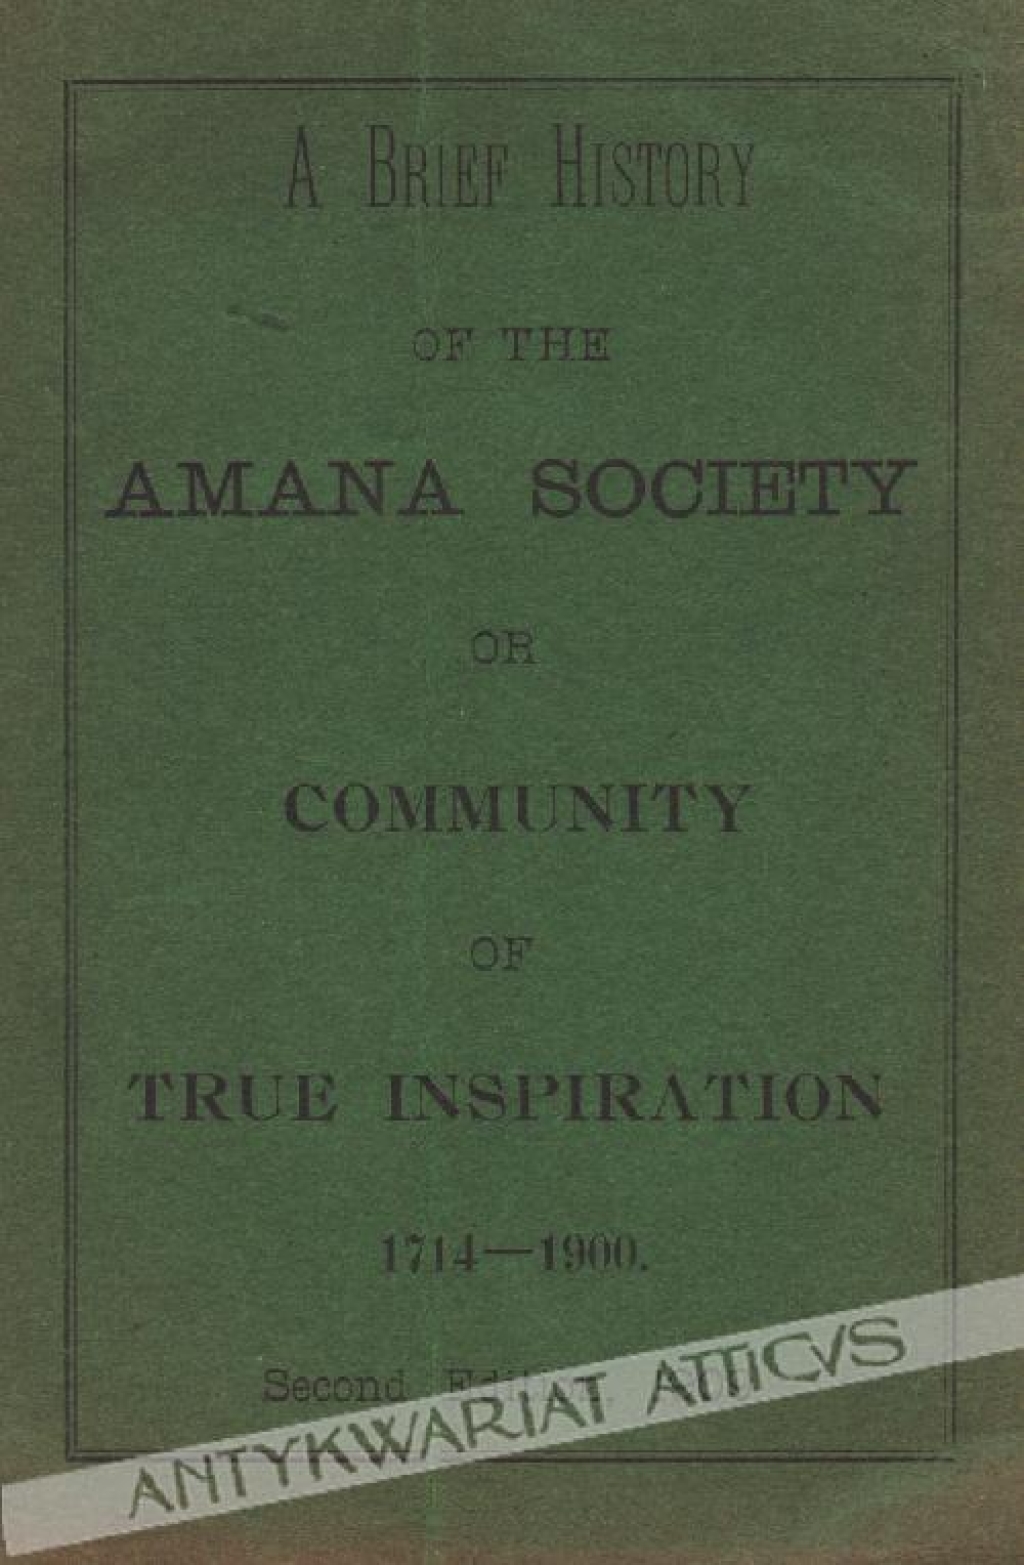 A brief history of the Amana Society or Community of True Inspiration 1714-1900